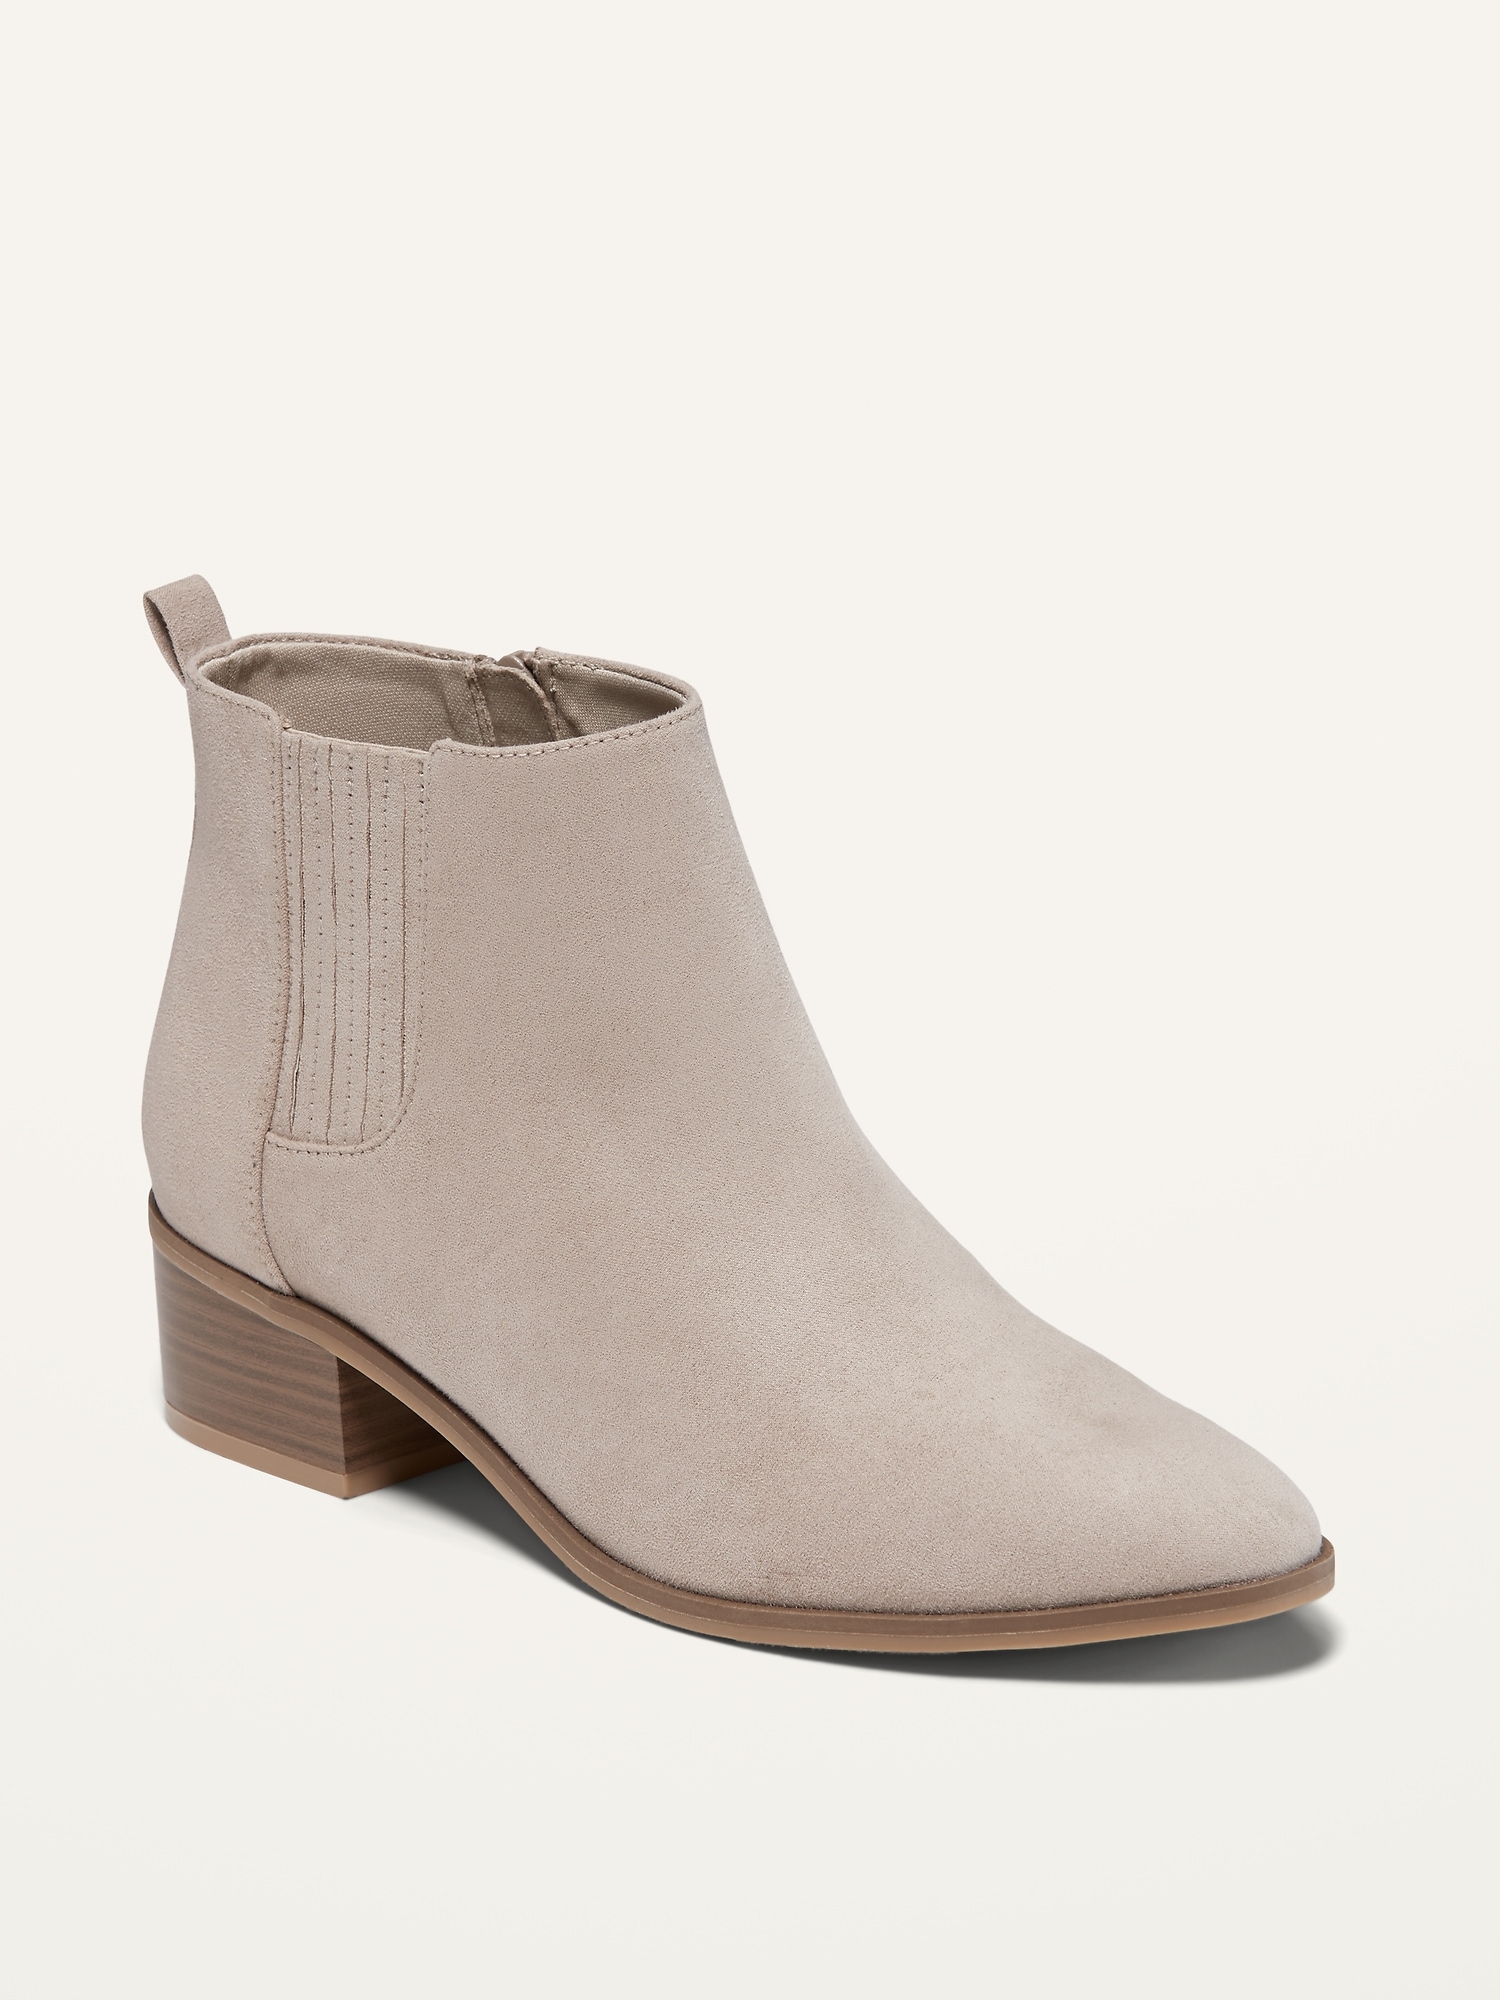 suede chelsea boots womens